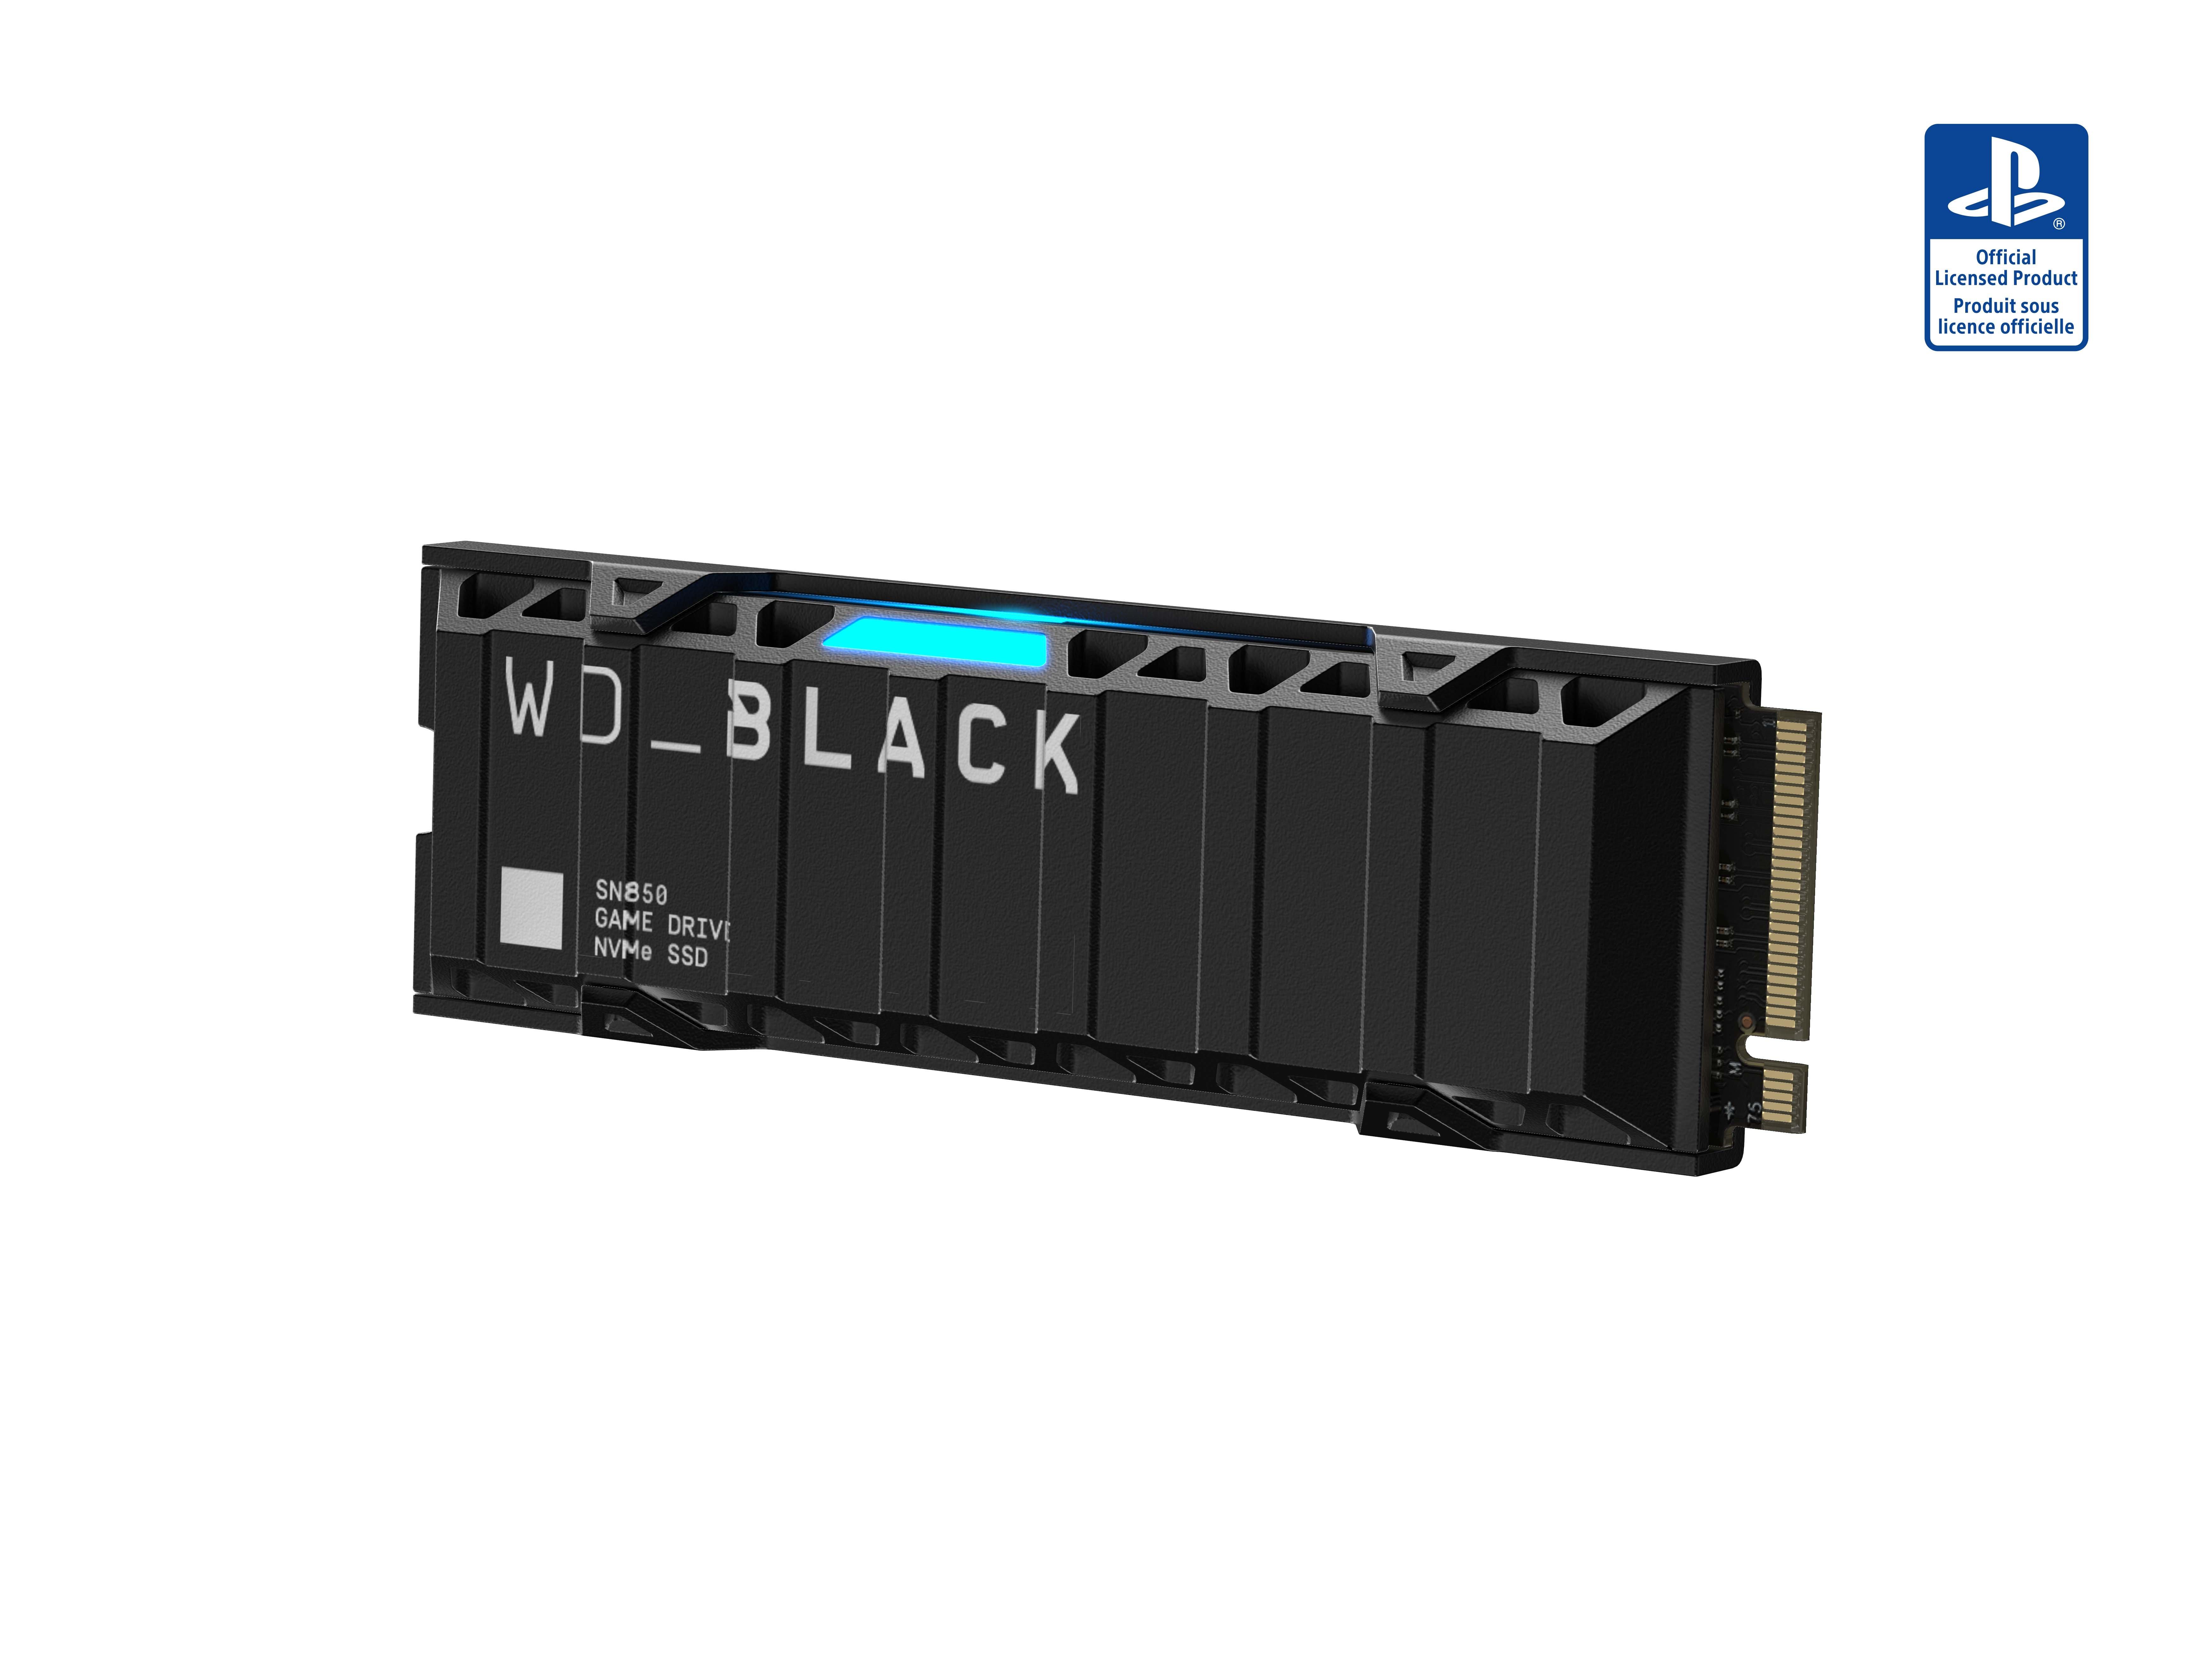 WD_BLACK 1TB SN850 NVMe SSD for PlayStation 5 | GameStop